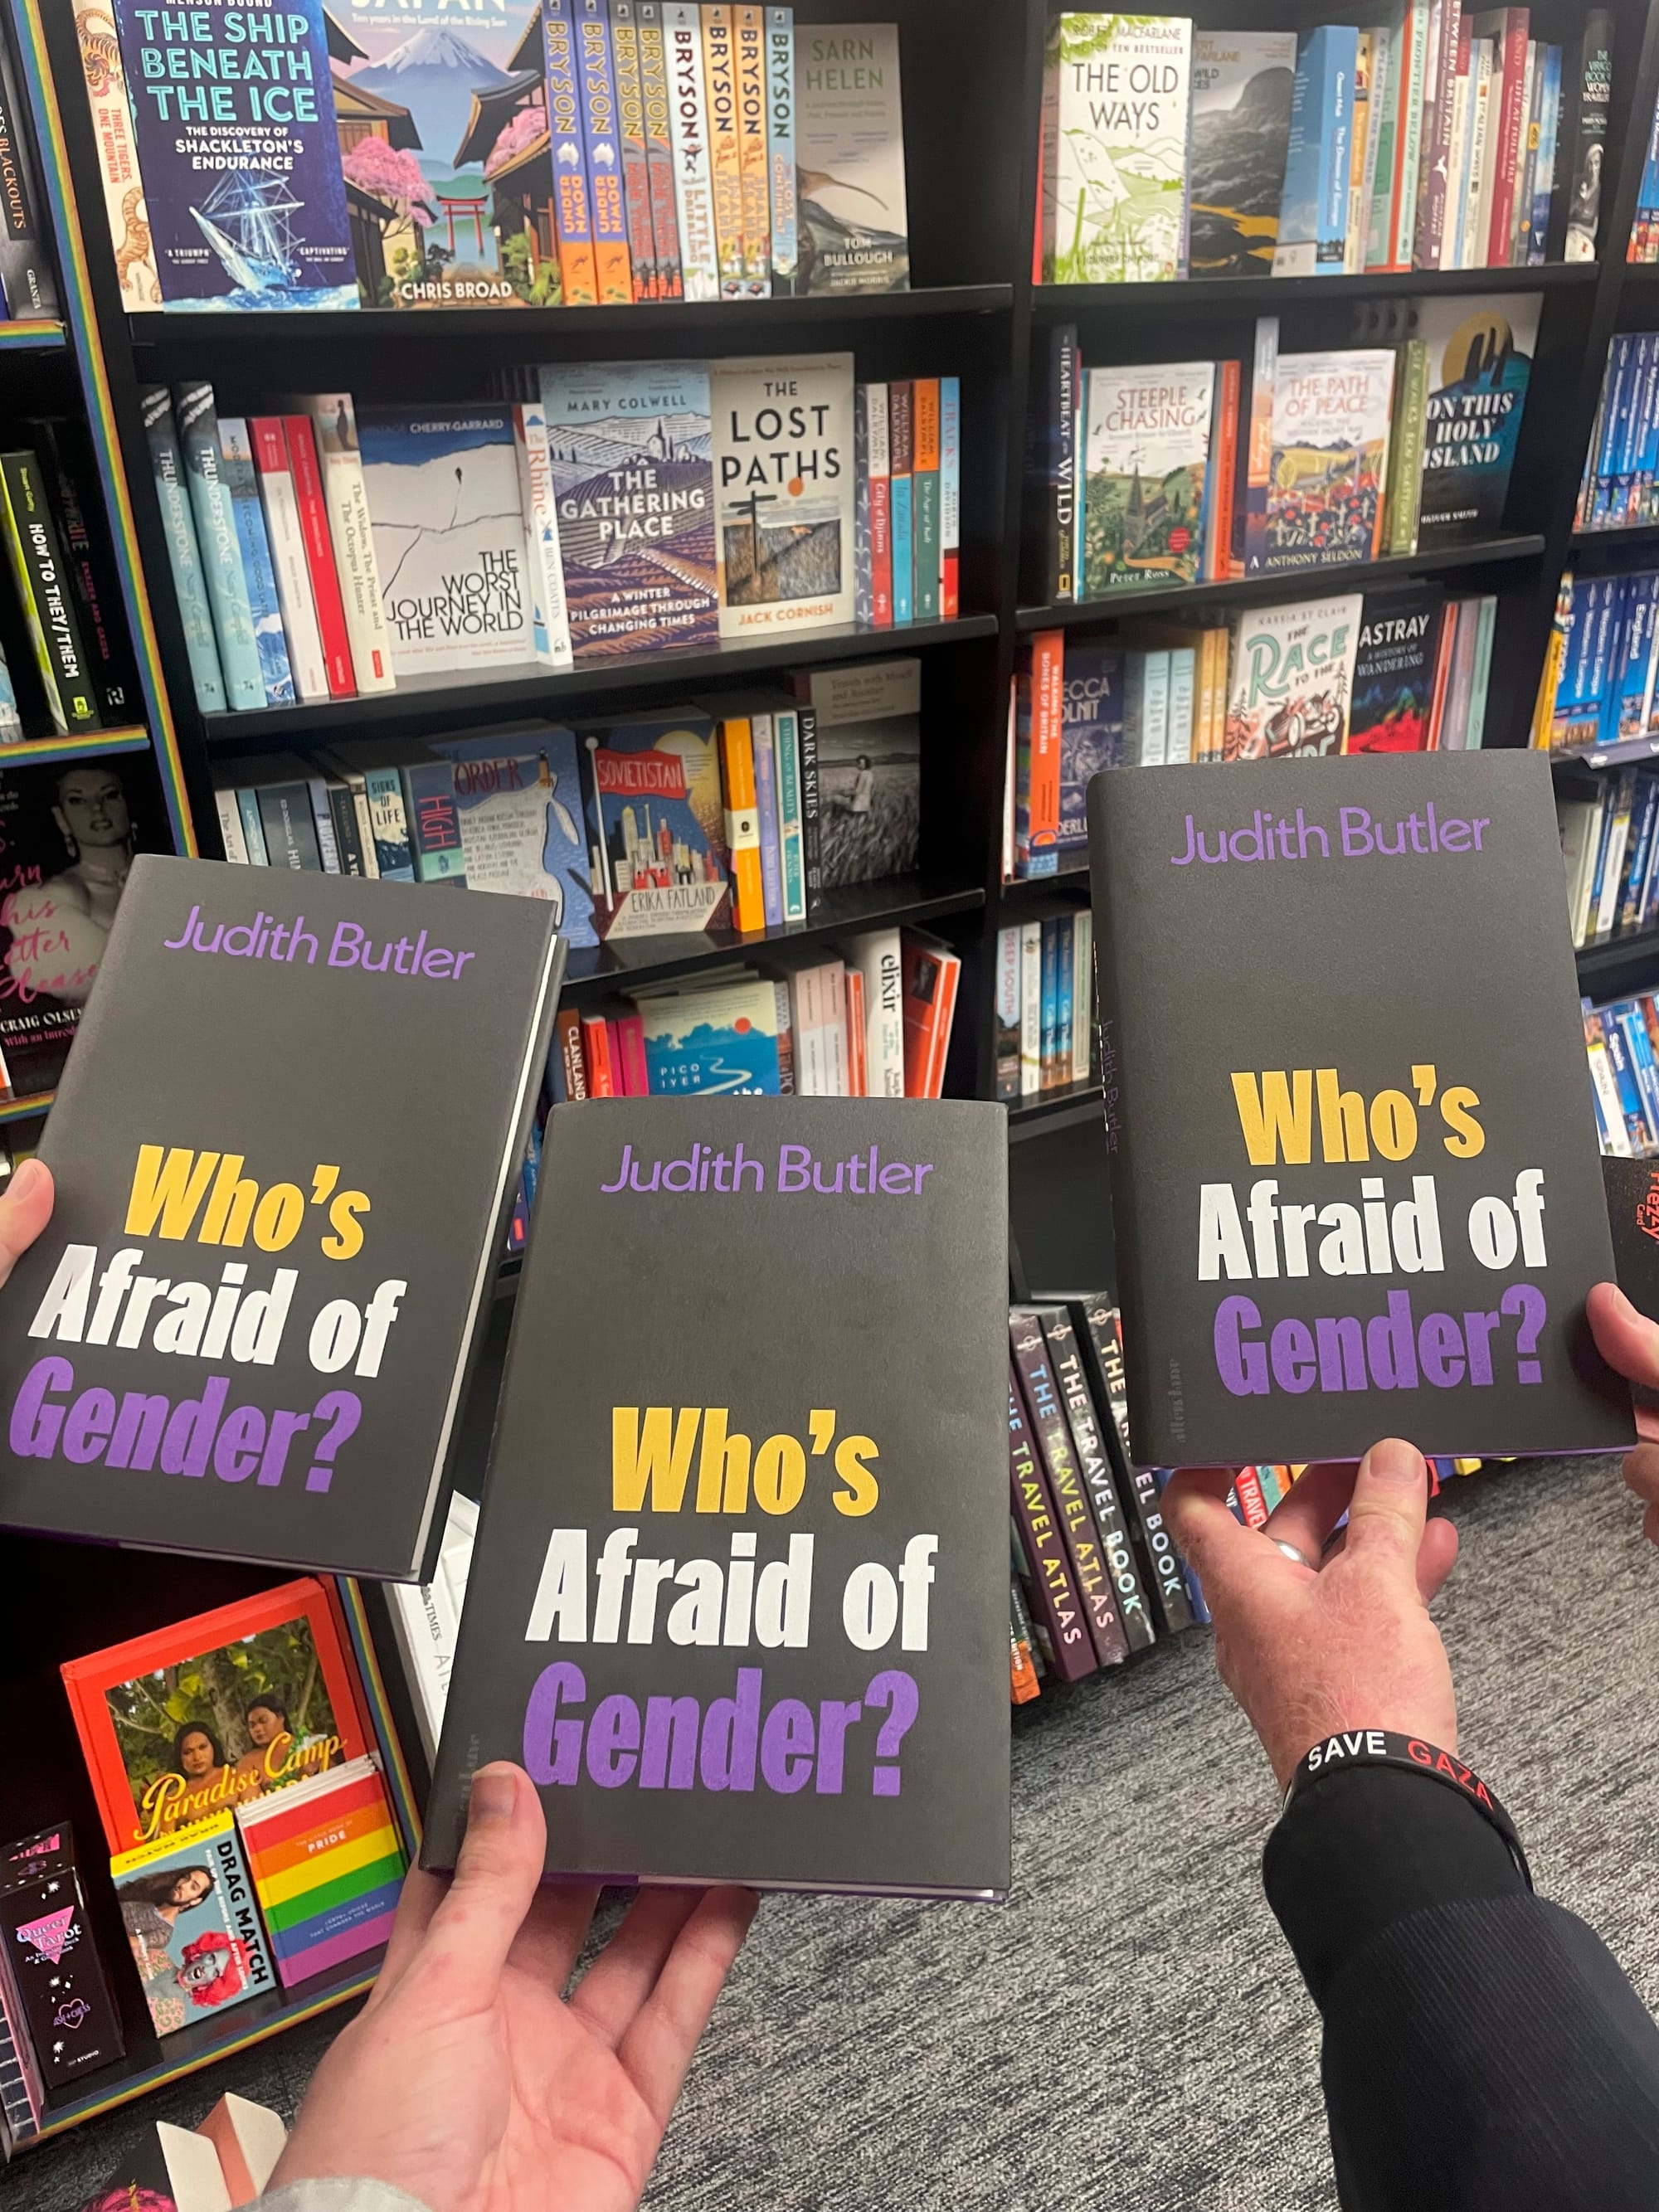 Three hands holding three copies of Who's Afraid of Gender against a backdrop of bookshelves.